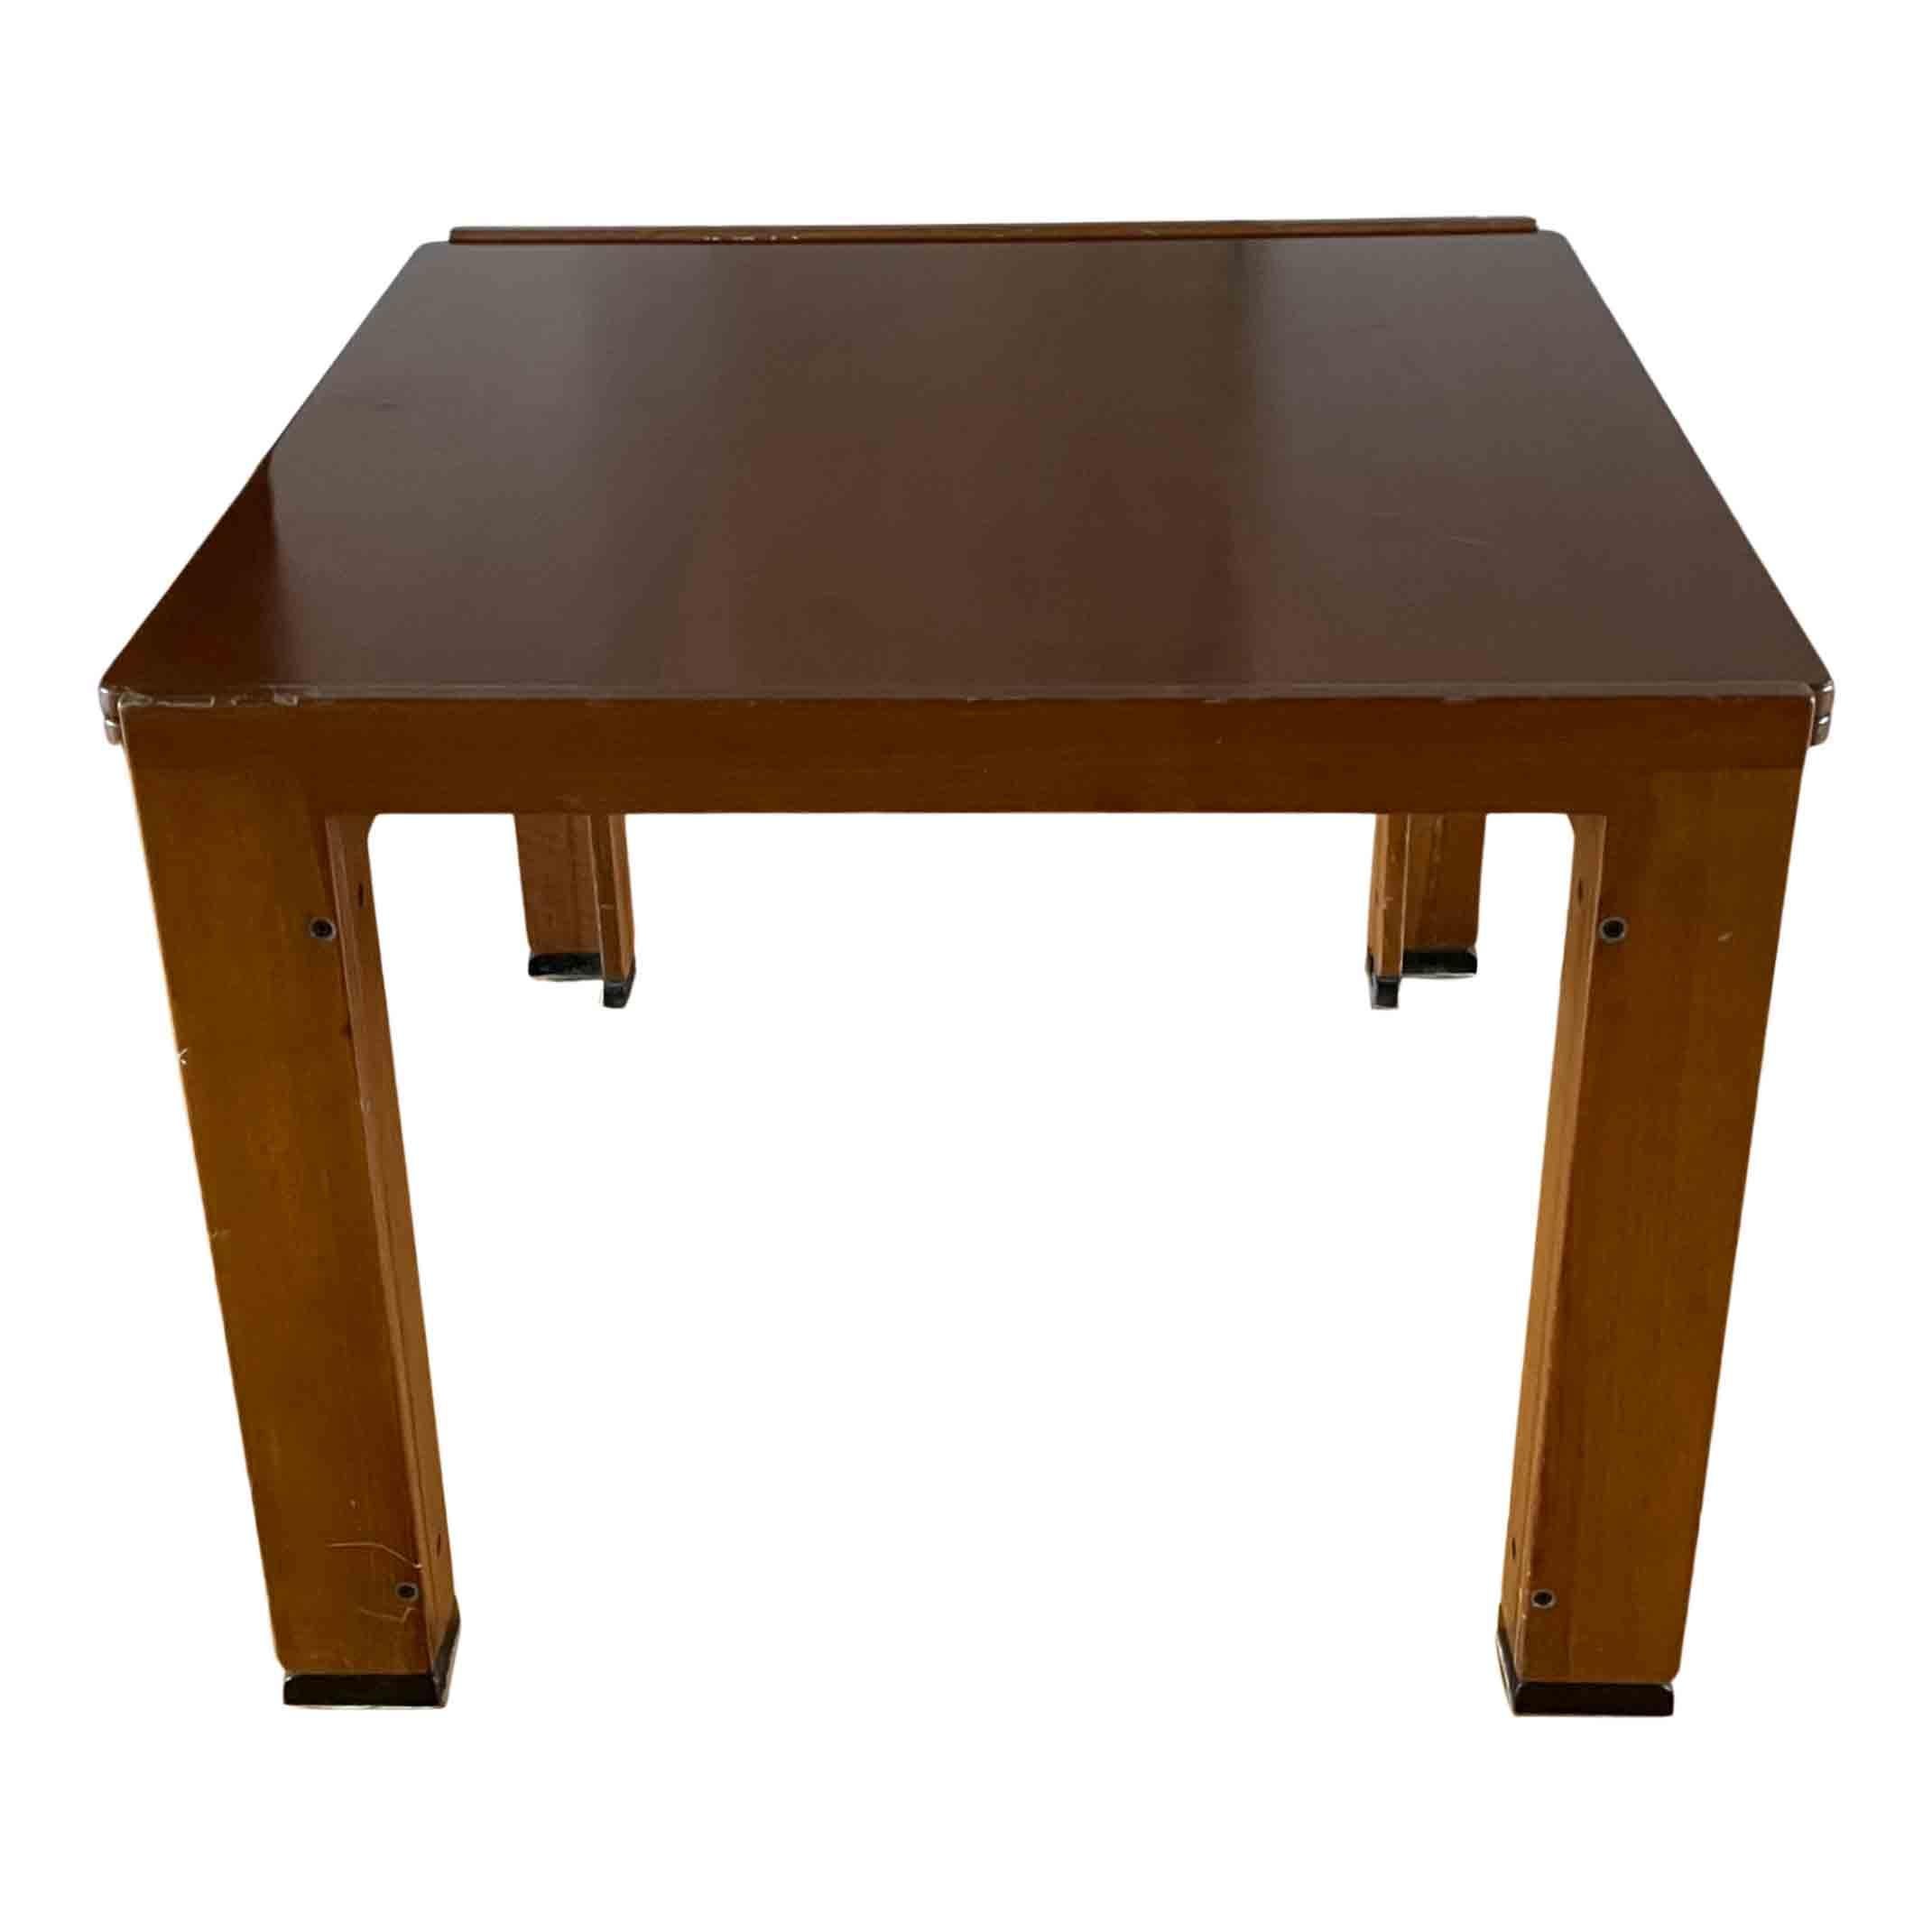 The “778” model is an example of solid wood boards arranged to form a C-shaped frame. The table, with a top that opens, is supported by four trestles, two of which are a few centimeters lower than the others so that the top can rest on them when the